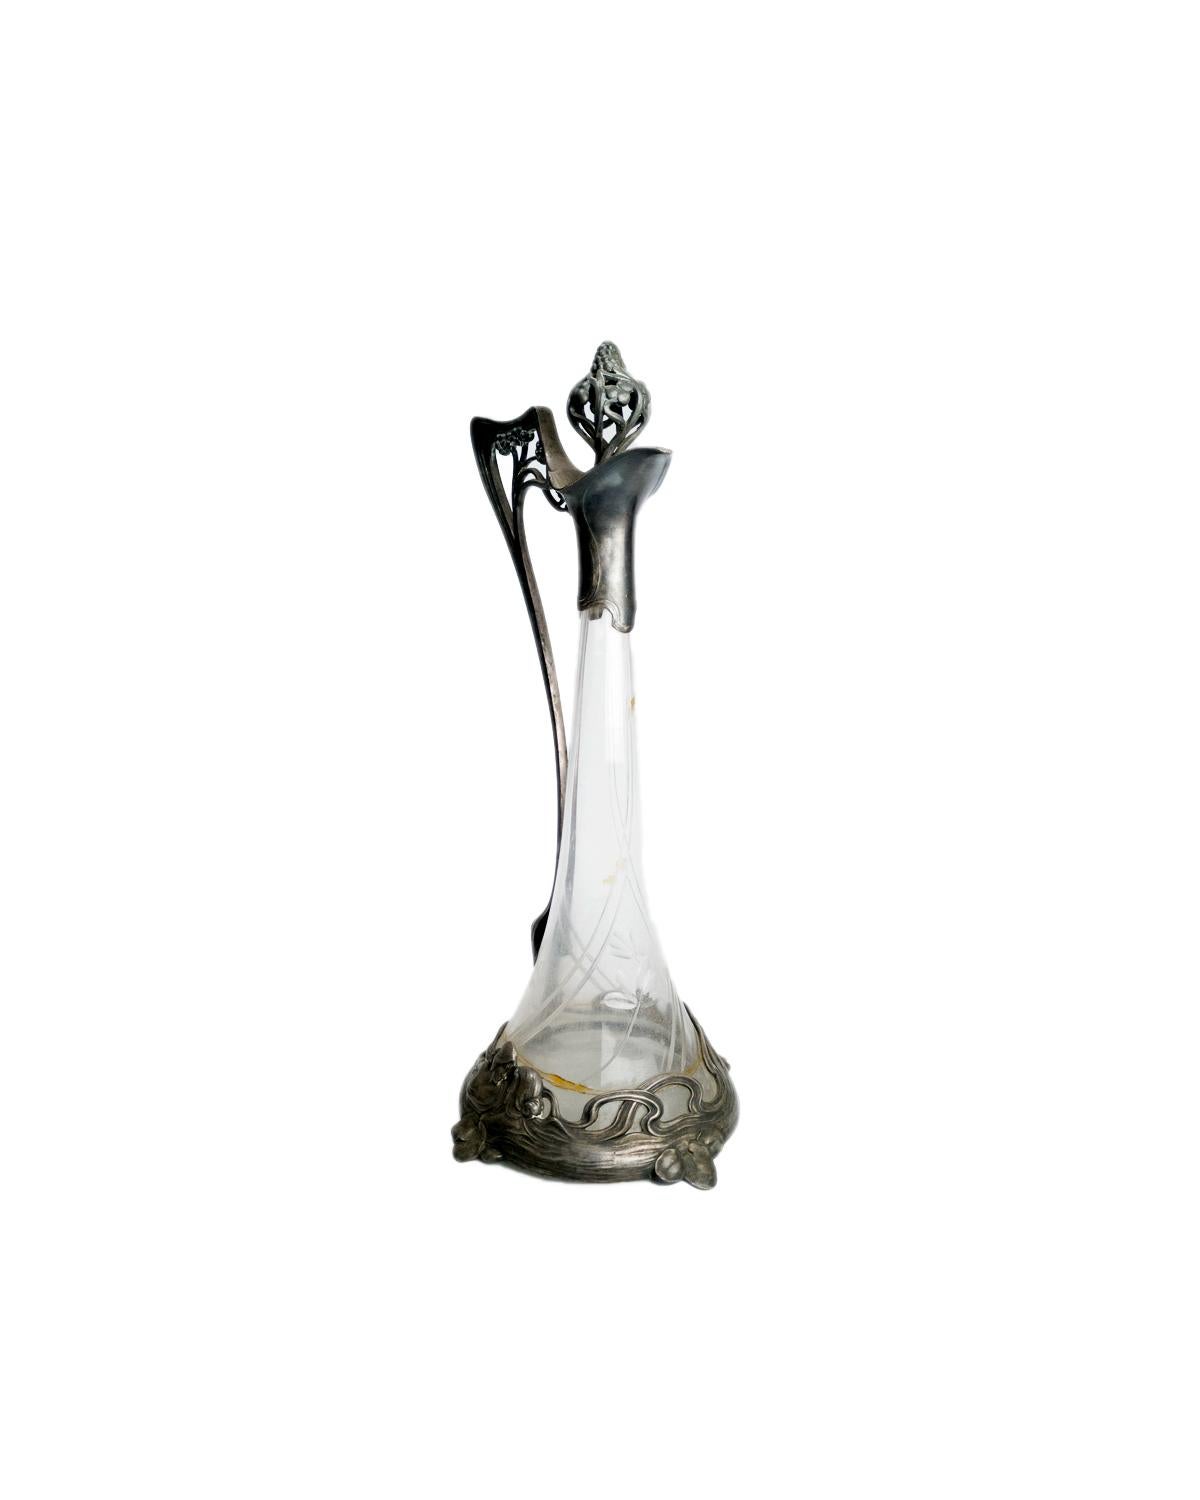 An antique Jugendstil style Lady Glass Claret Jug Decanter with refined plug, a WMF designed, glass and silver plated.
An excellent example of Art Nouveau Design with vine decoration in the metal. 
